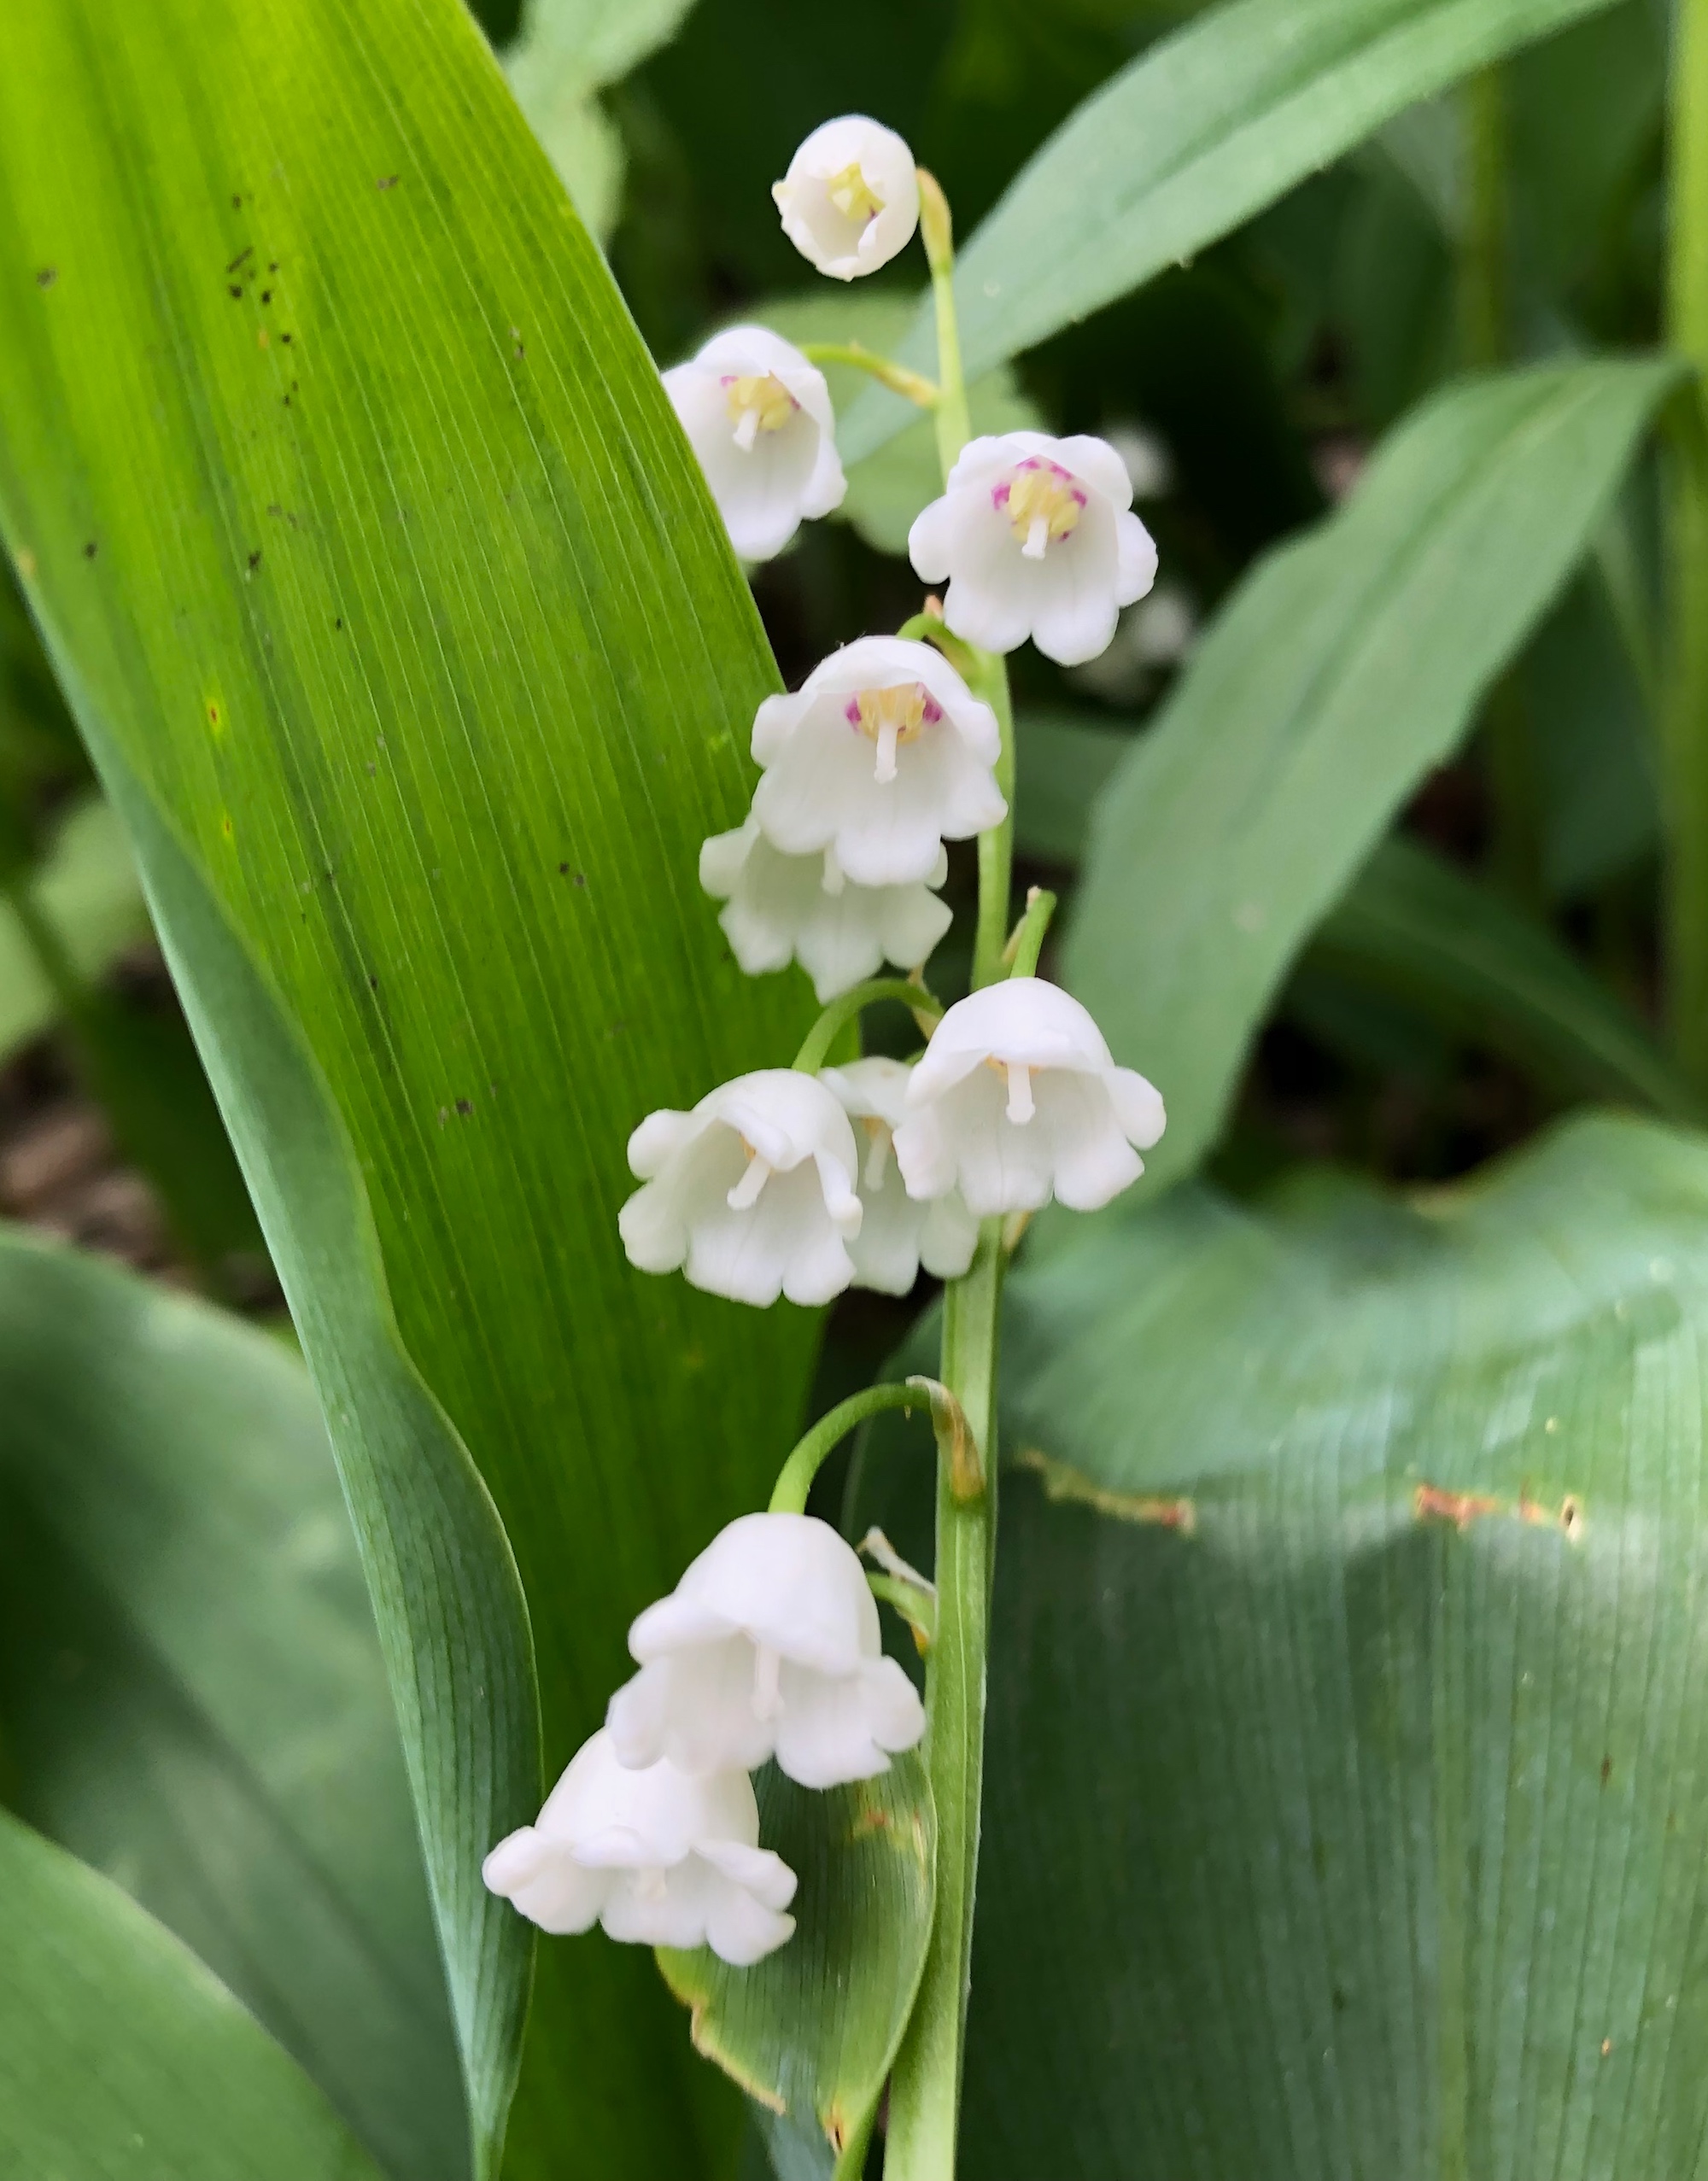 Lily of the Valley in Oak Savanna on May 26, 2019.